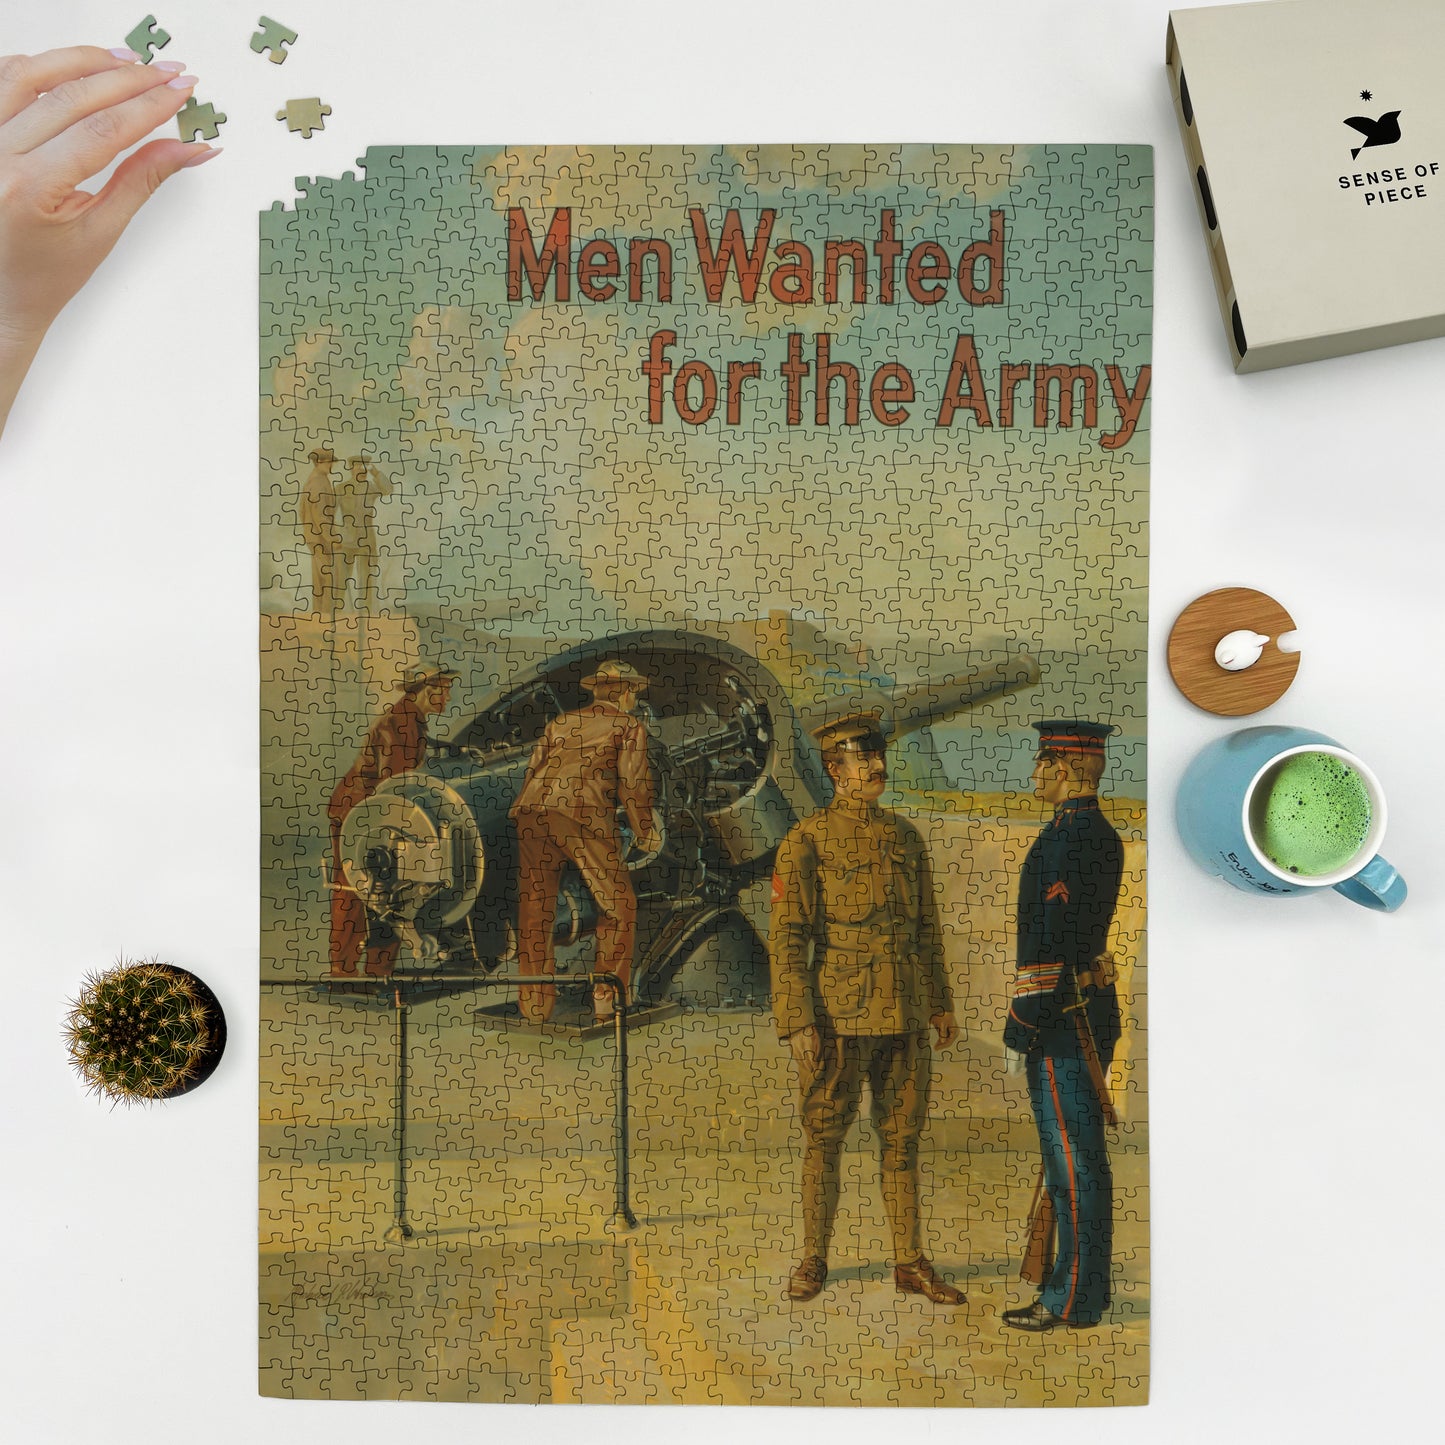 1000 piece puzzle 1910 Men wanted for the army Michael P  Whelan 